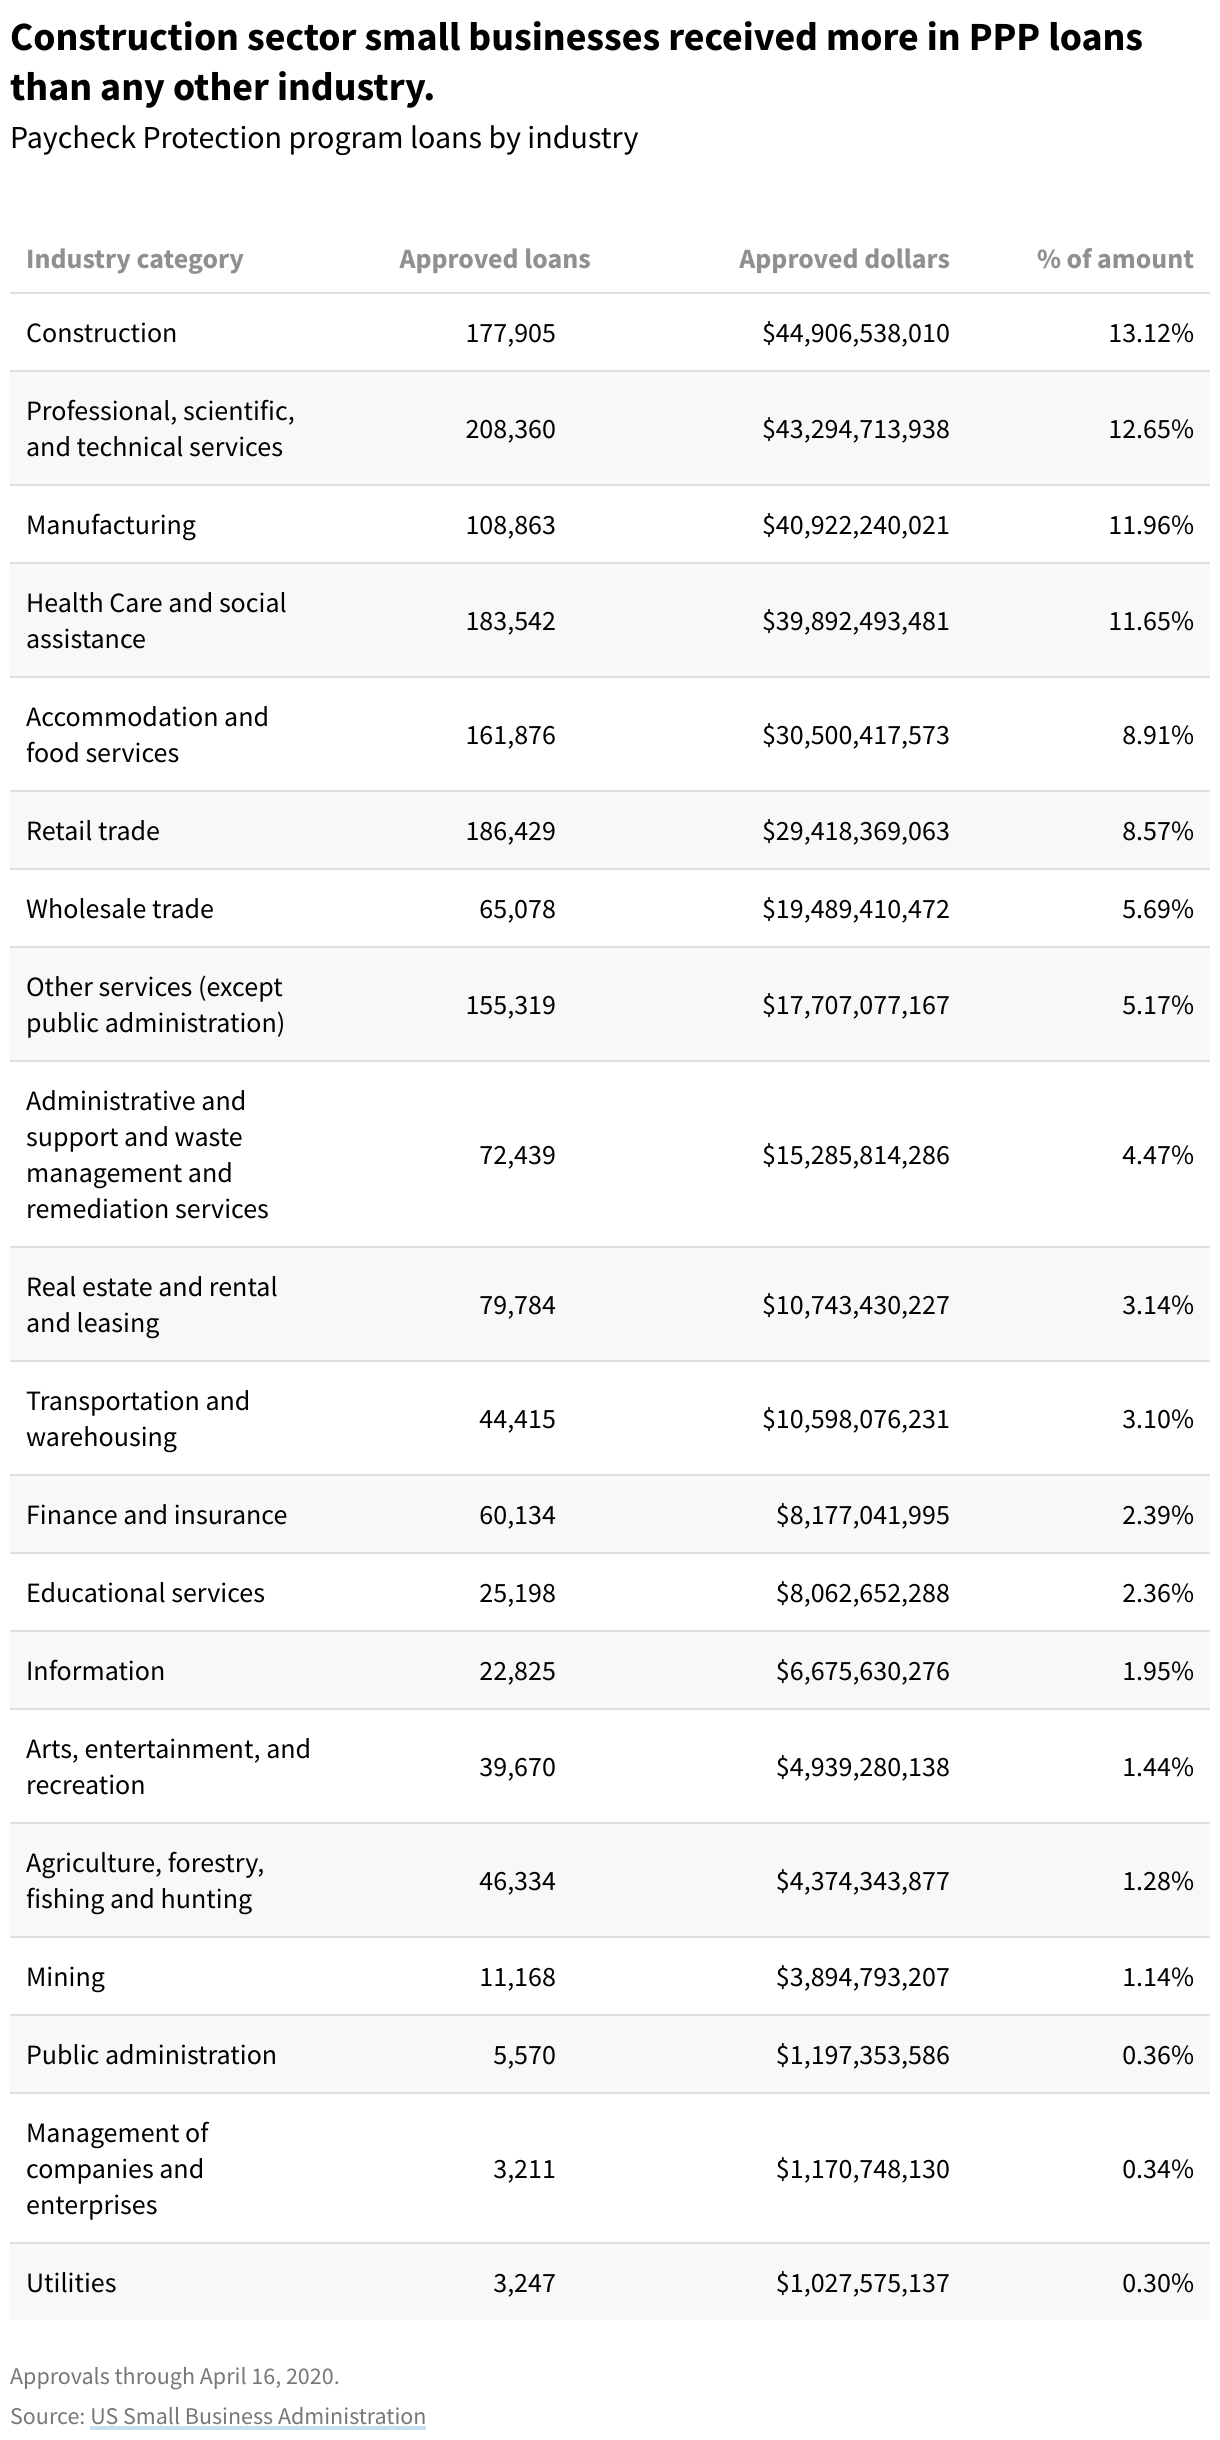 Table showing Paycheck Protection program loans by industry. Construction sector small businesses received more in PPP loans than any other industry.
